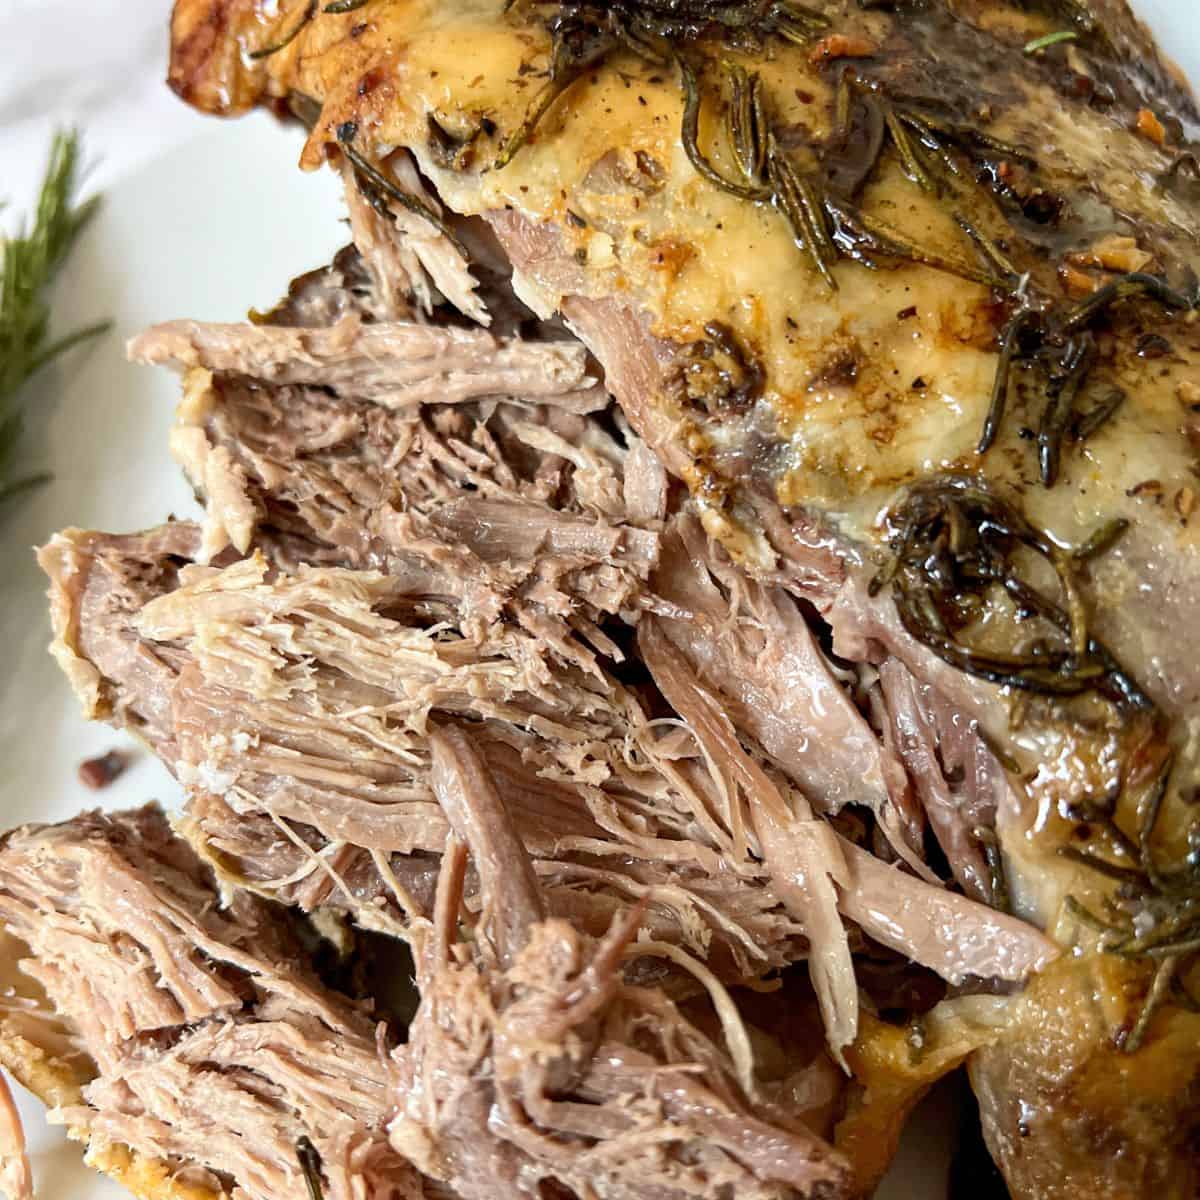 Carved leg of lamb on a plate.